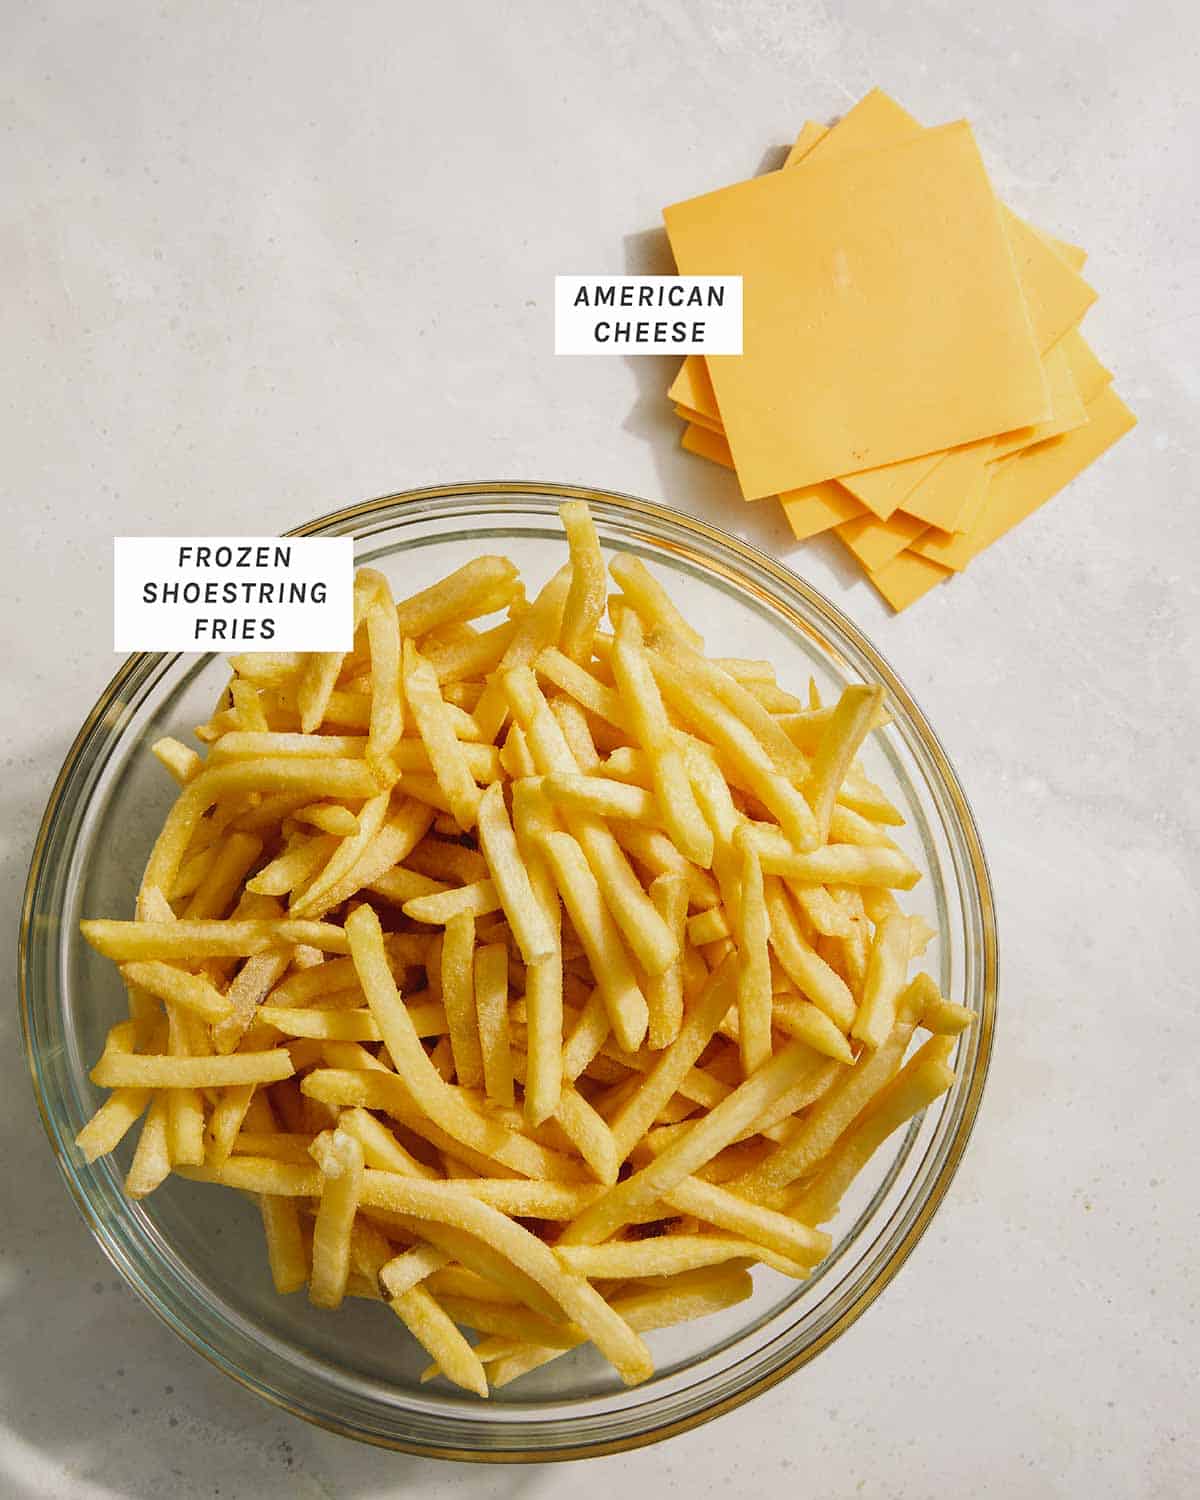 Shoestring French Fry Recipe